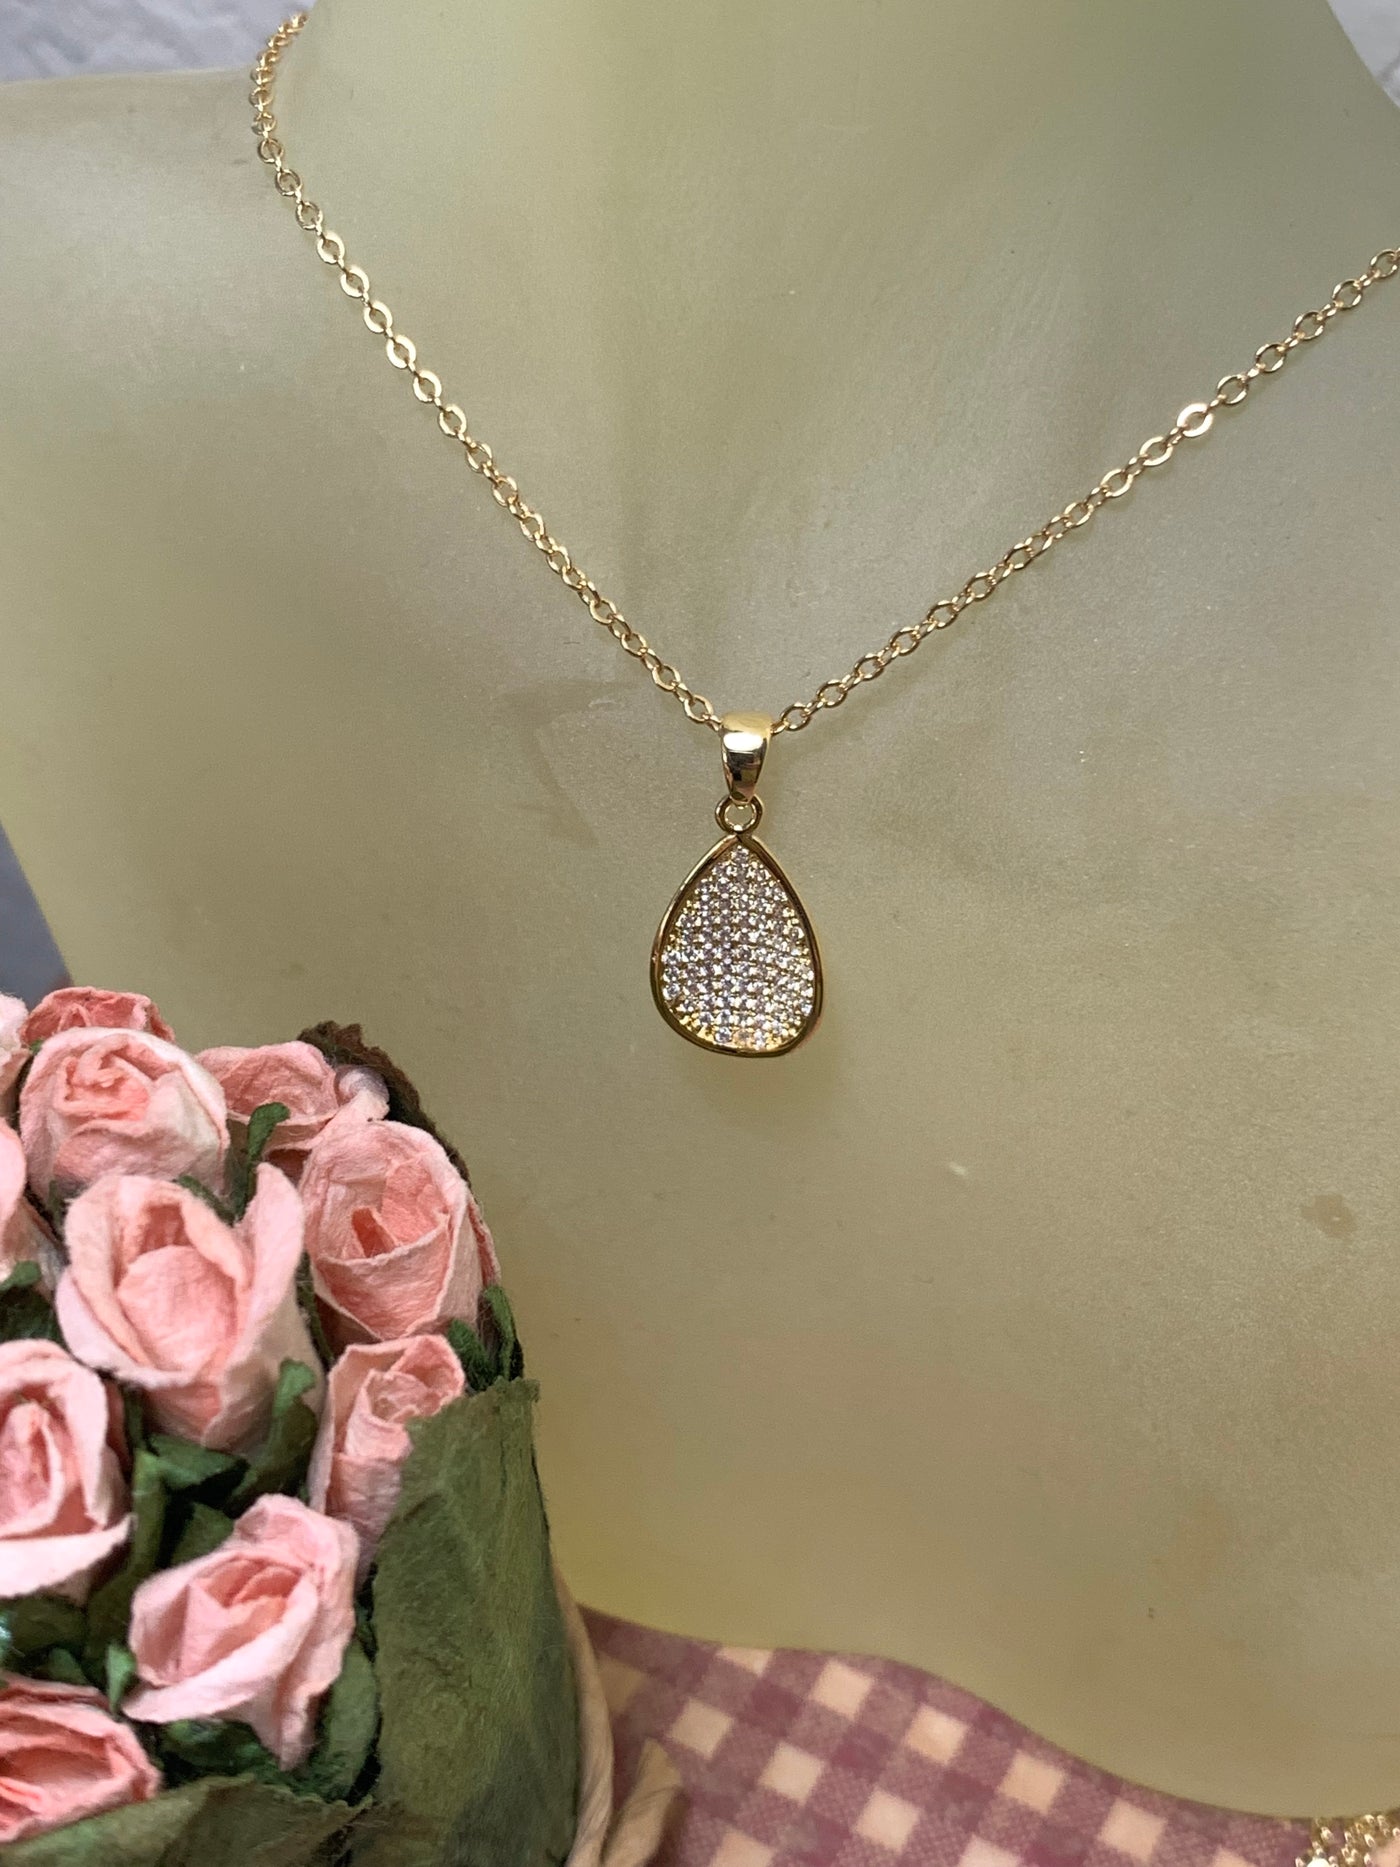 Curvy Tear Shape Pave Set CZ Pendant in Silver, Yellow & Rose Gold Tone